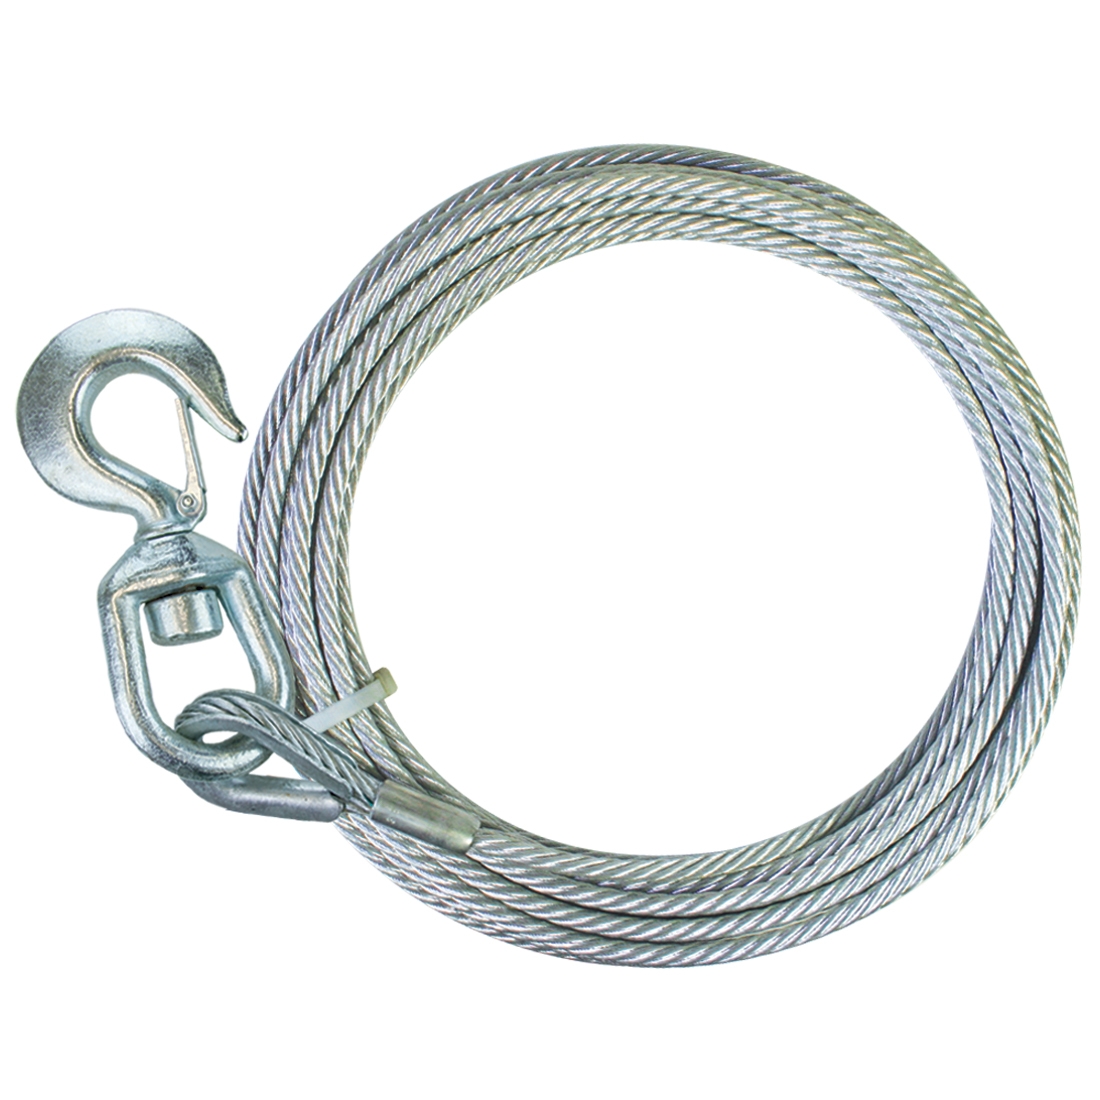 1/2 x 50 EIPS IWRC Steel Core with 3 Ton Swivel Hook BA Products Ships in 1 to 2 Business Days 4-12SC50S Winch Cable 